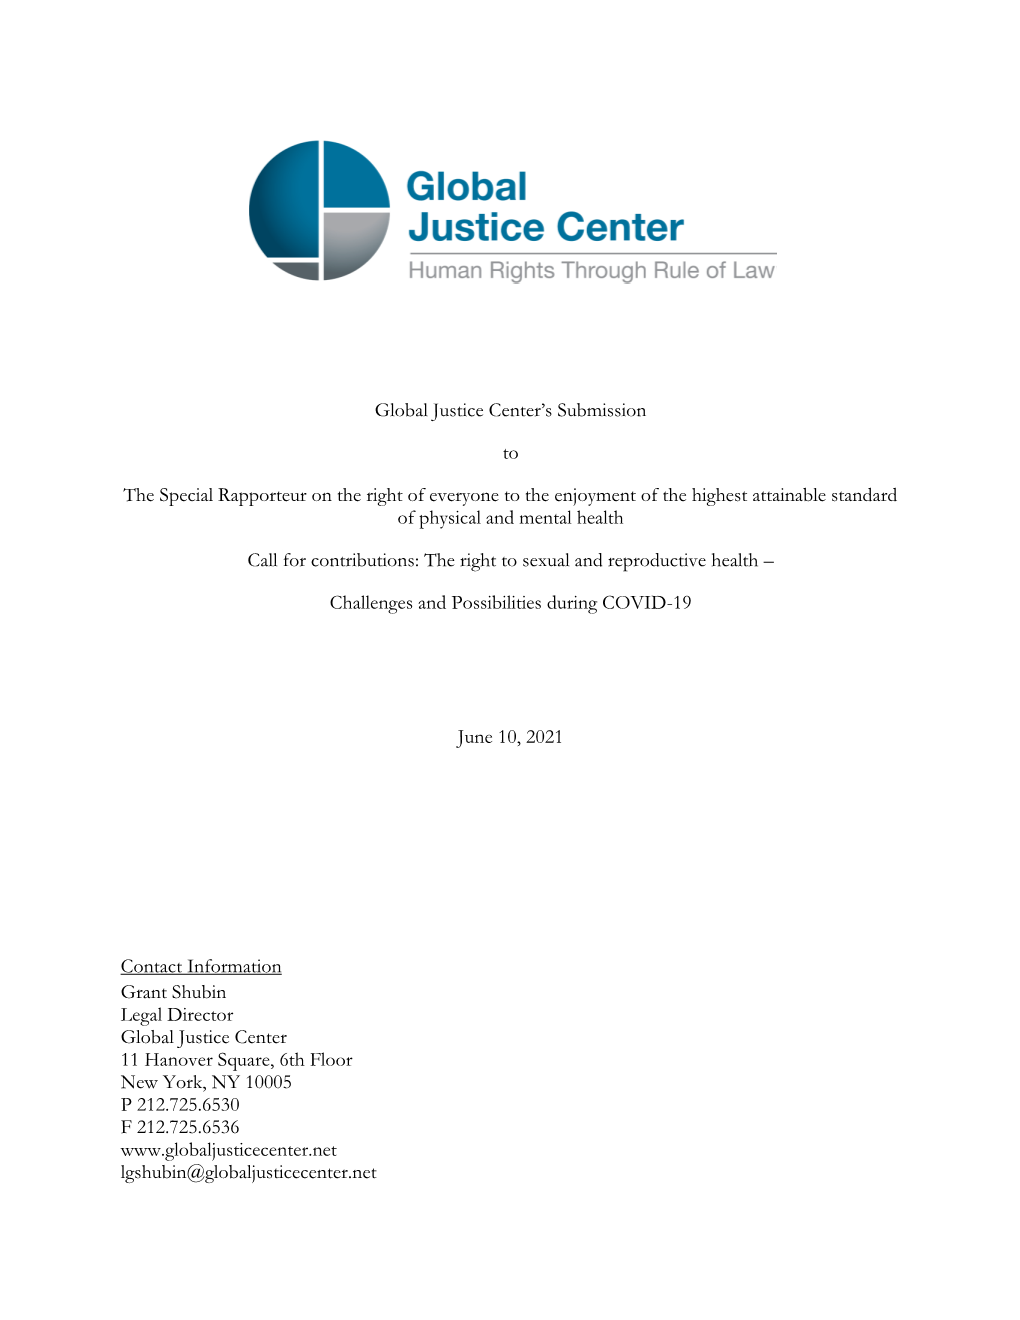 Global Justice Center's Submission to the Special Rapporteur on the Right